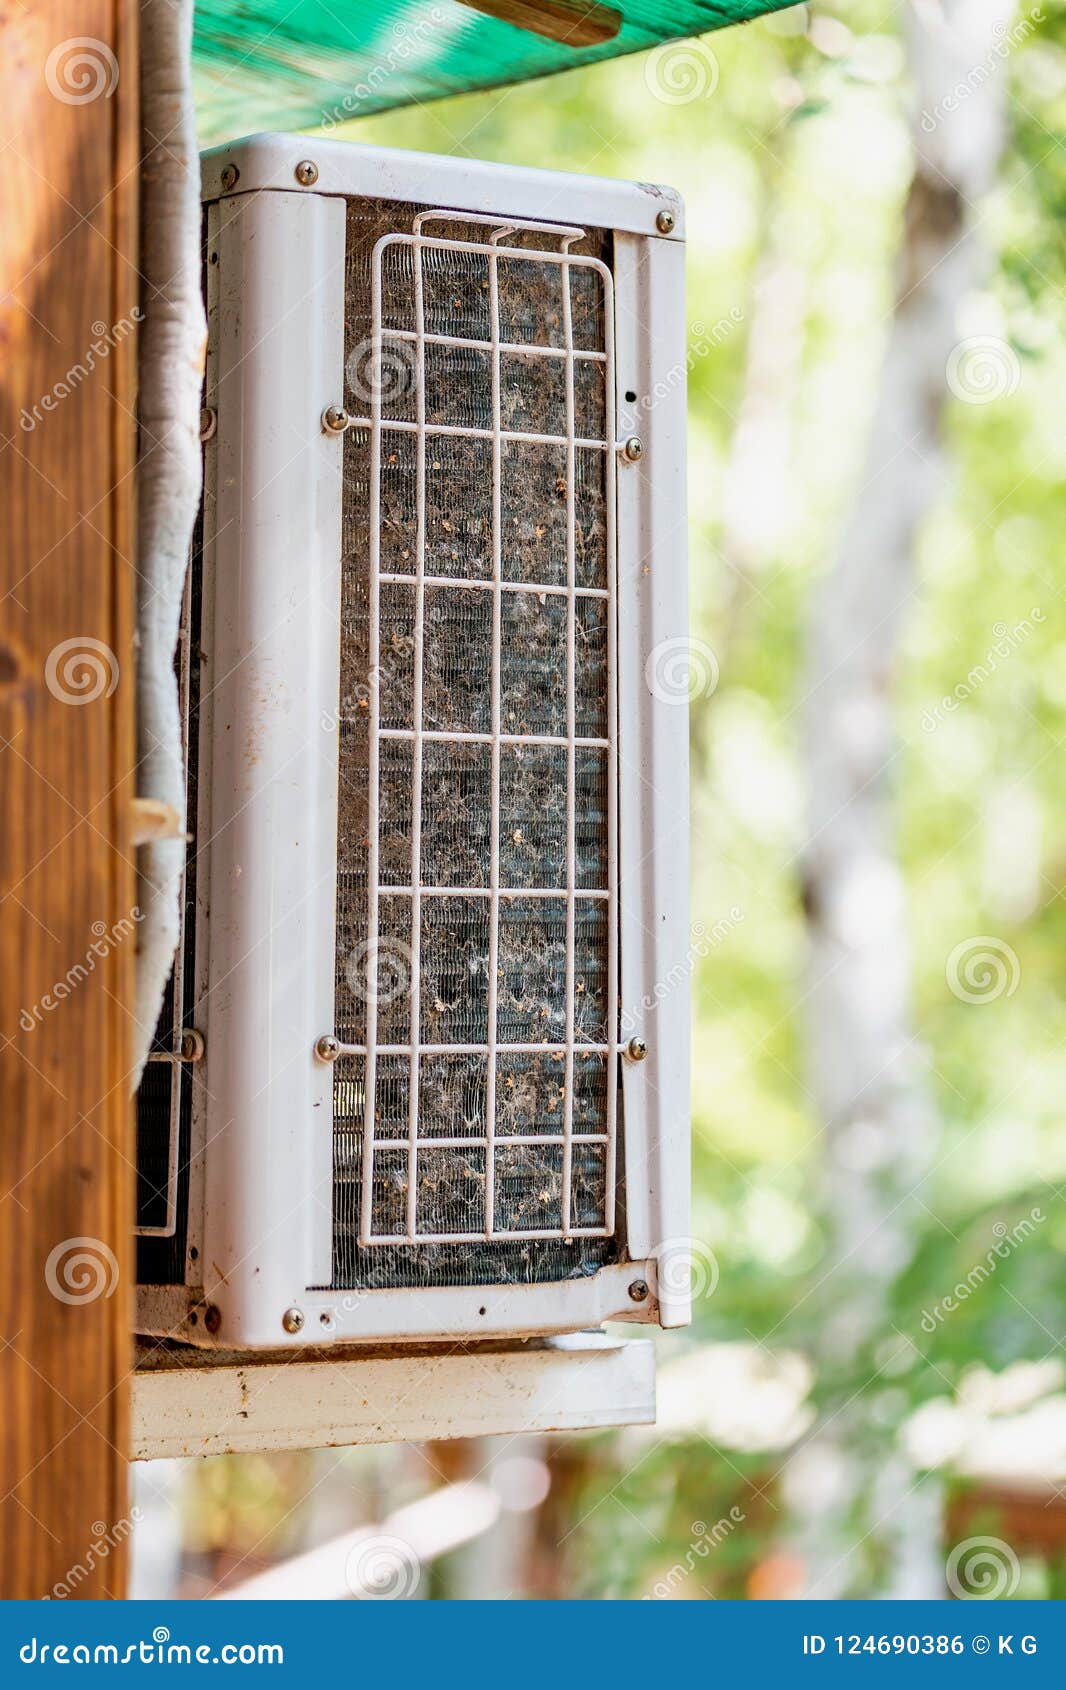 close-up outdoor air condition unit with clogged obstructed compressor radiator grill. details of air conditioner needed